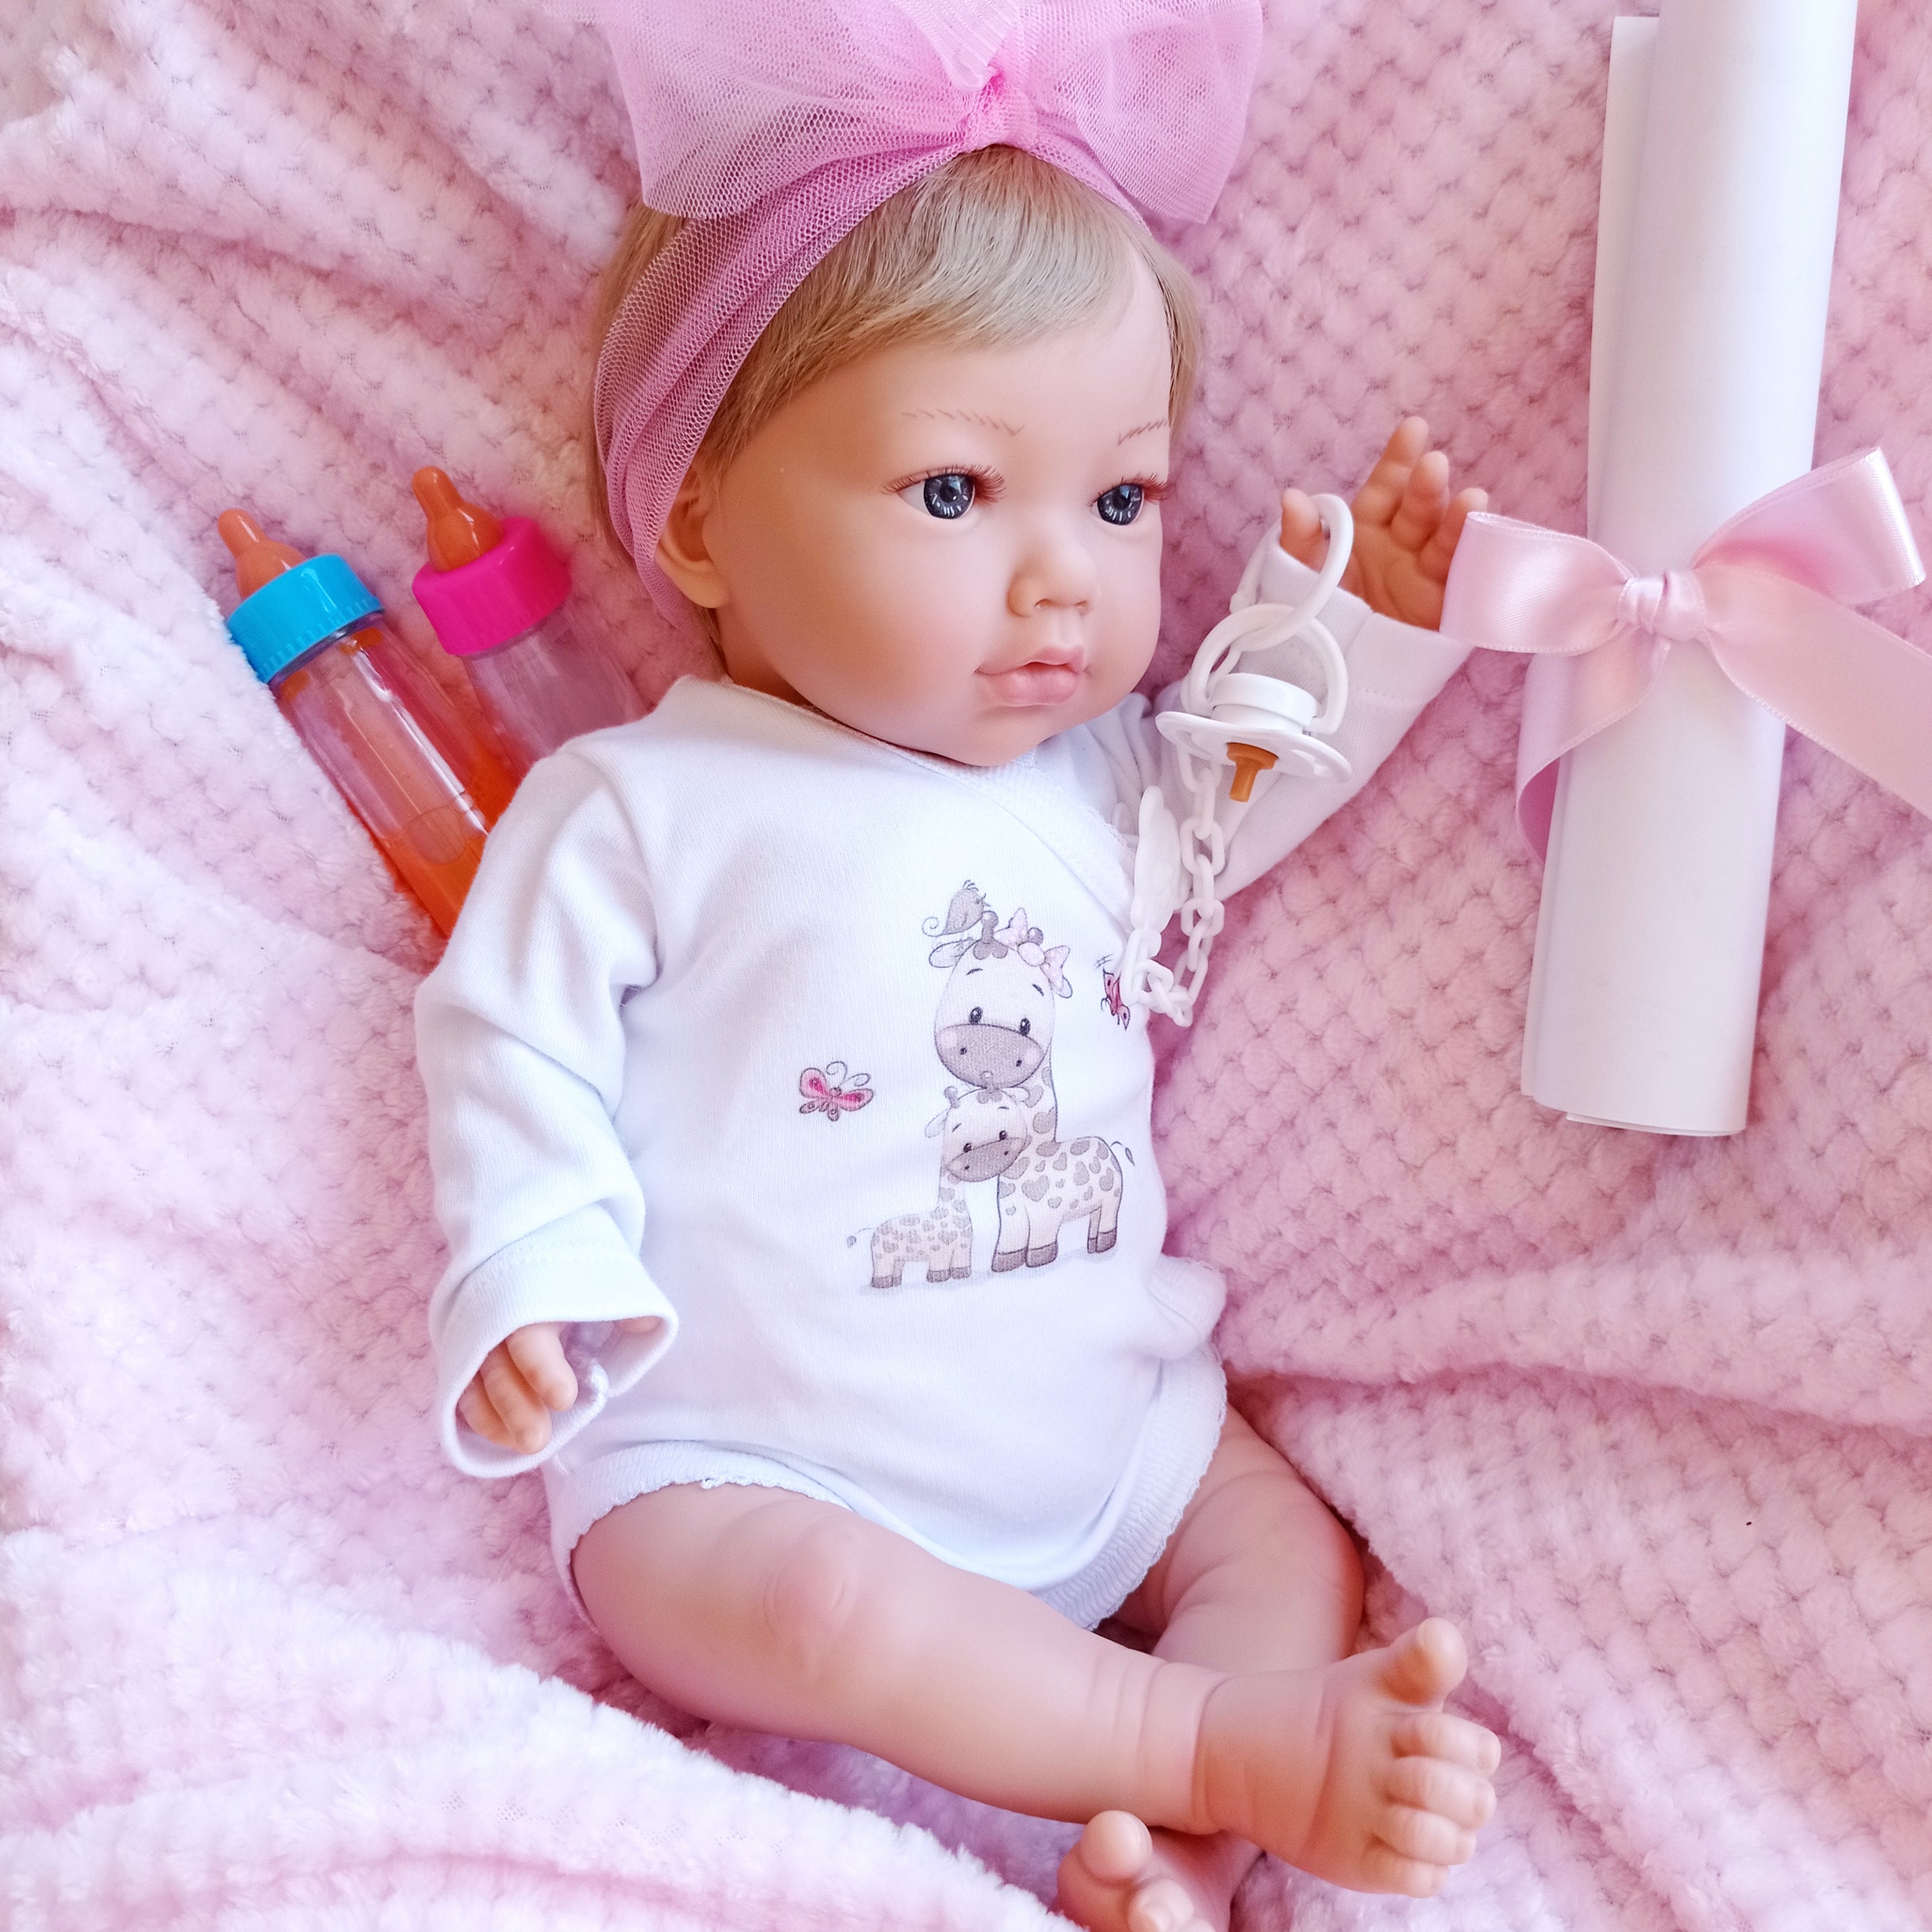 Reborn Baby Alma Reborn Doll - 48CM and 2KG - SILICONE VINYL and HEAD DROPPING EFFECT 